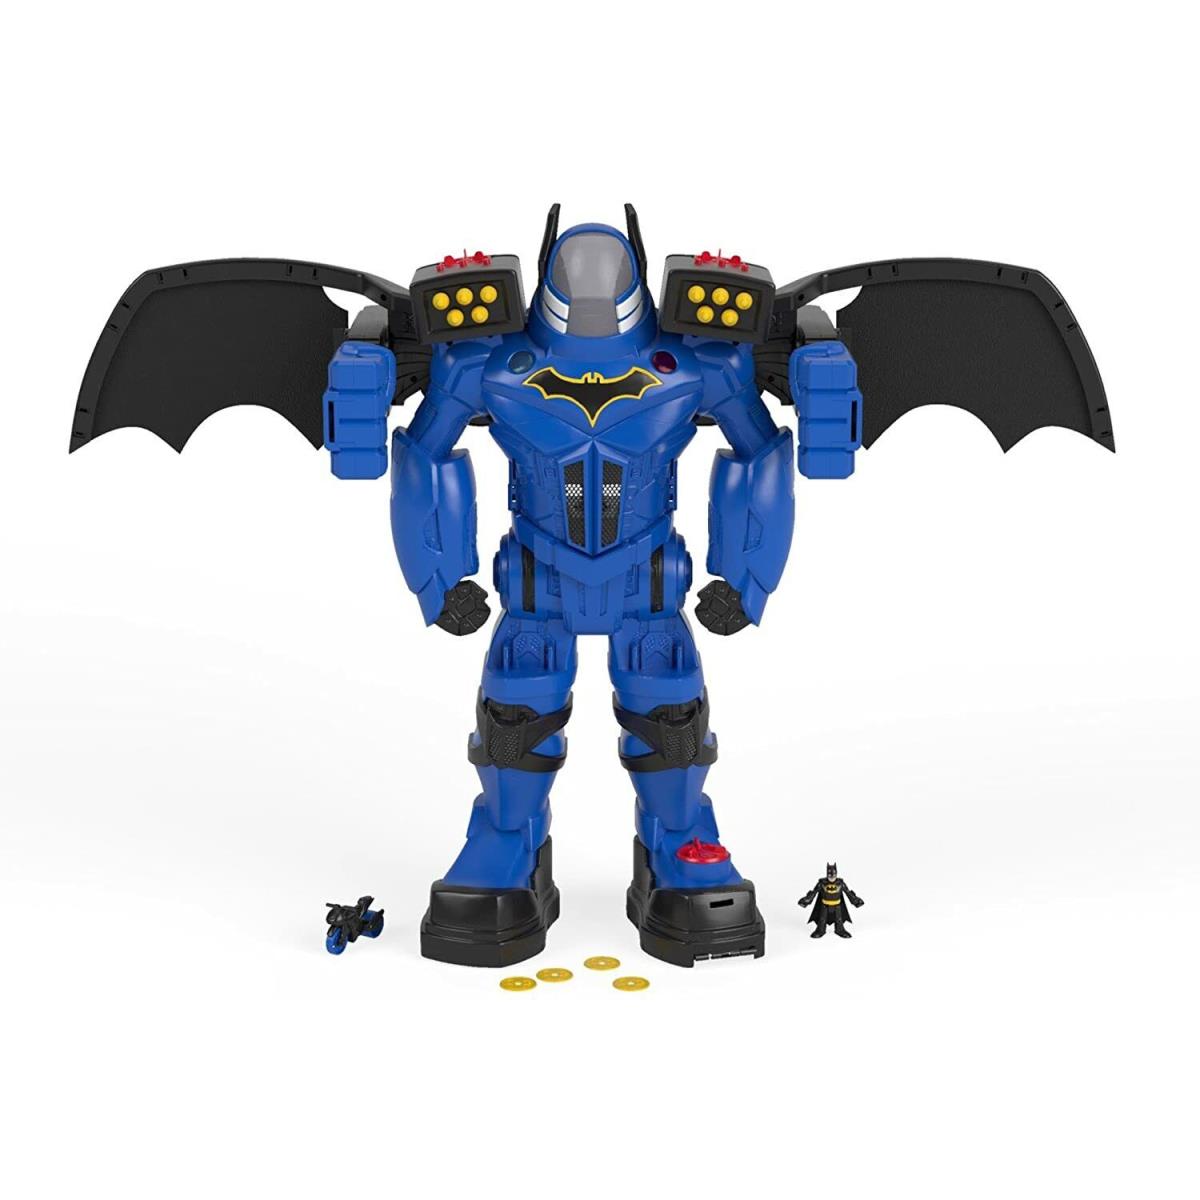 Fisher Price Batbot Xtreme Super Friends Imaginext DC 2 Ft Tall Wings Batman Toy